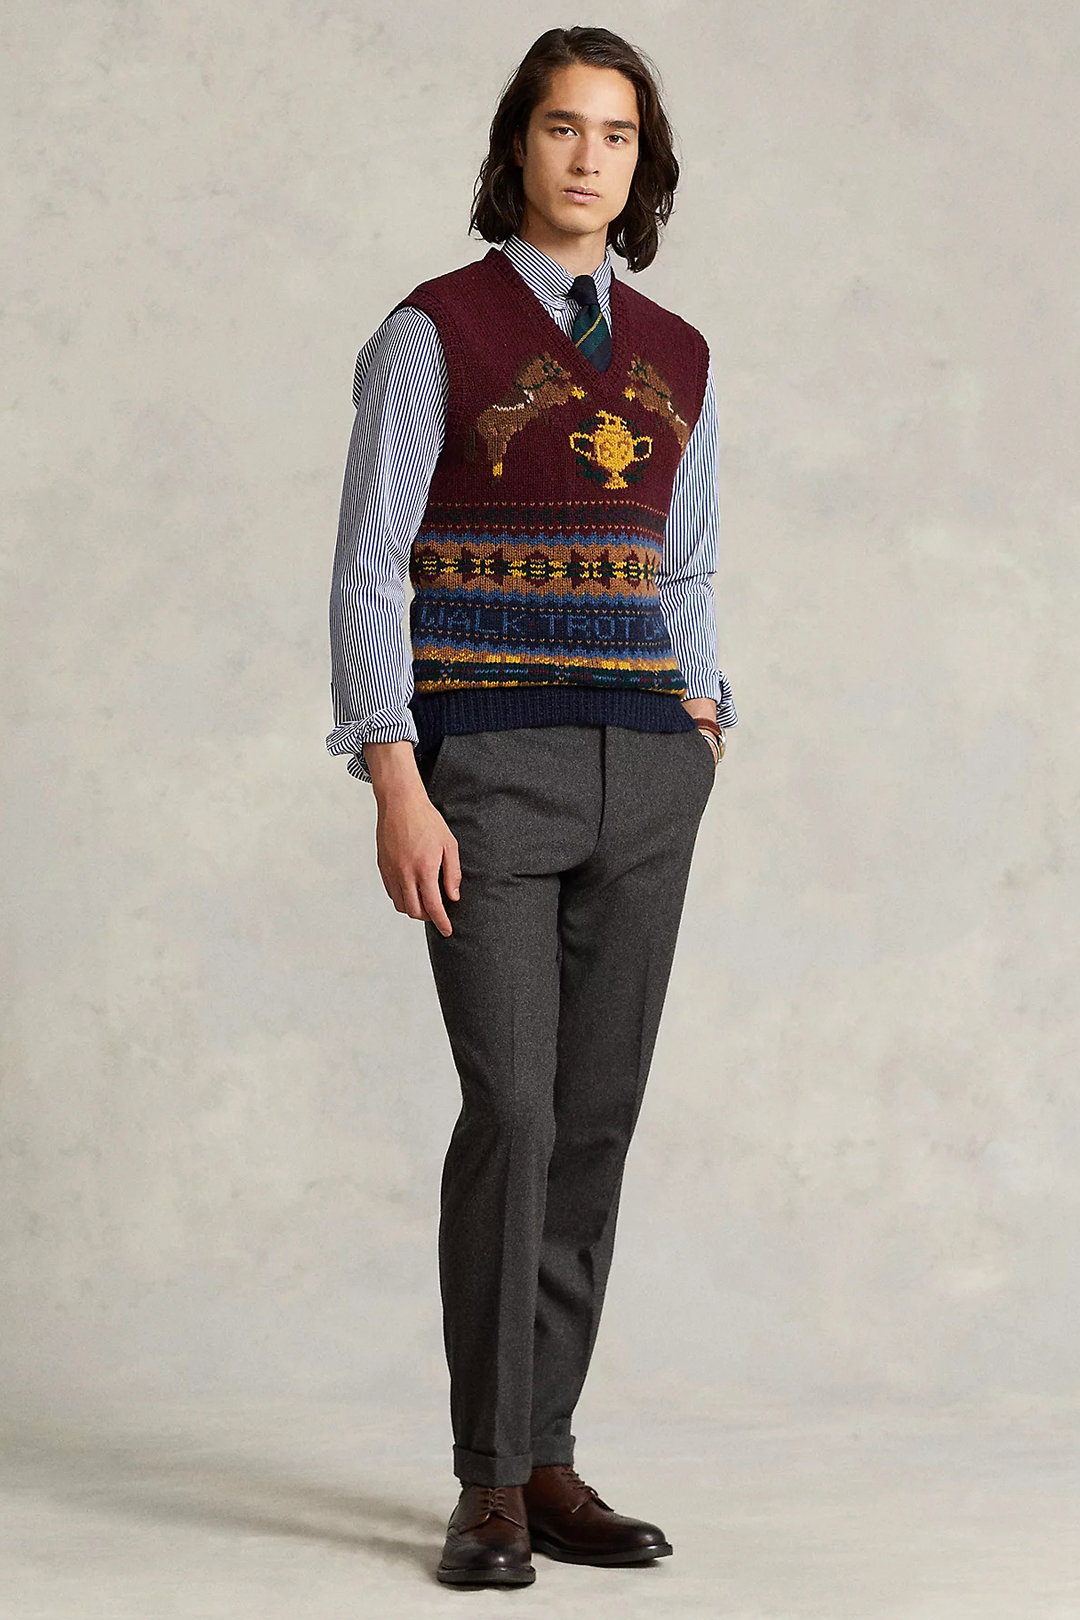 Burgundy sweater vest, blue shirt, dark green tie, charcoal dress pants and dark brown dress boots outfit